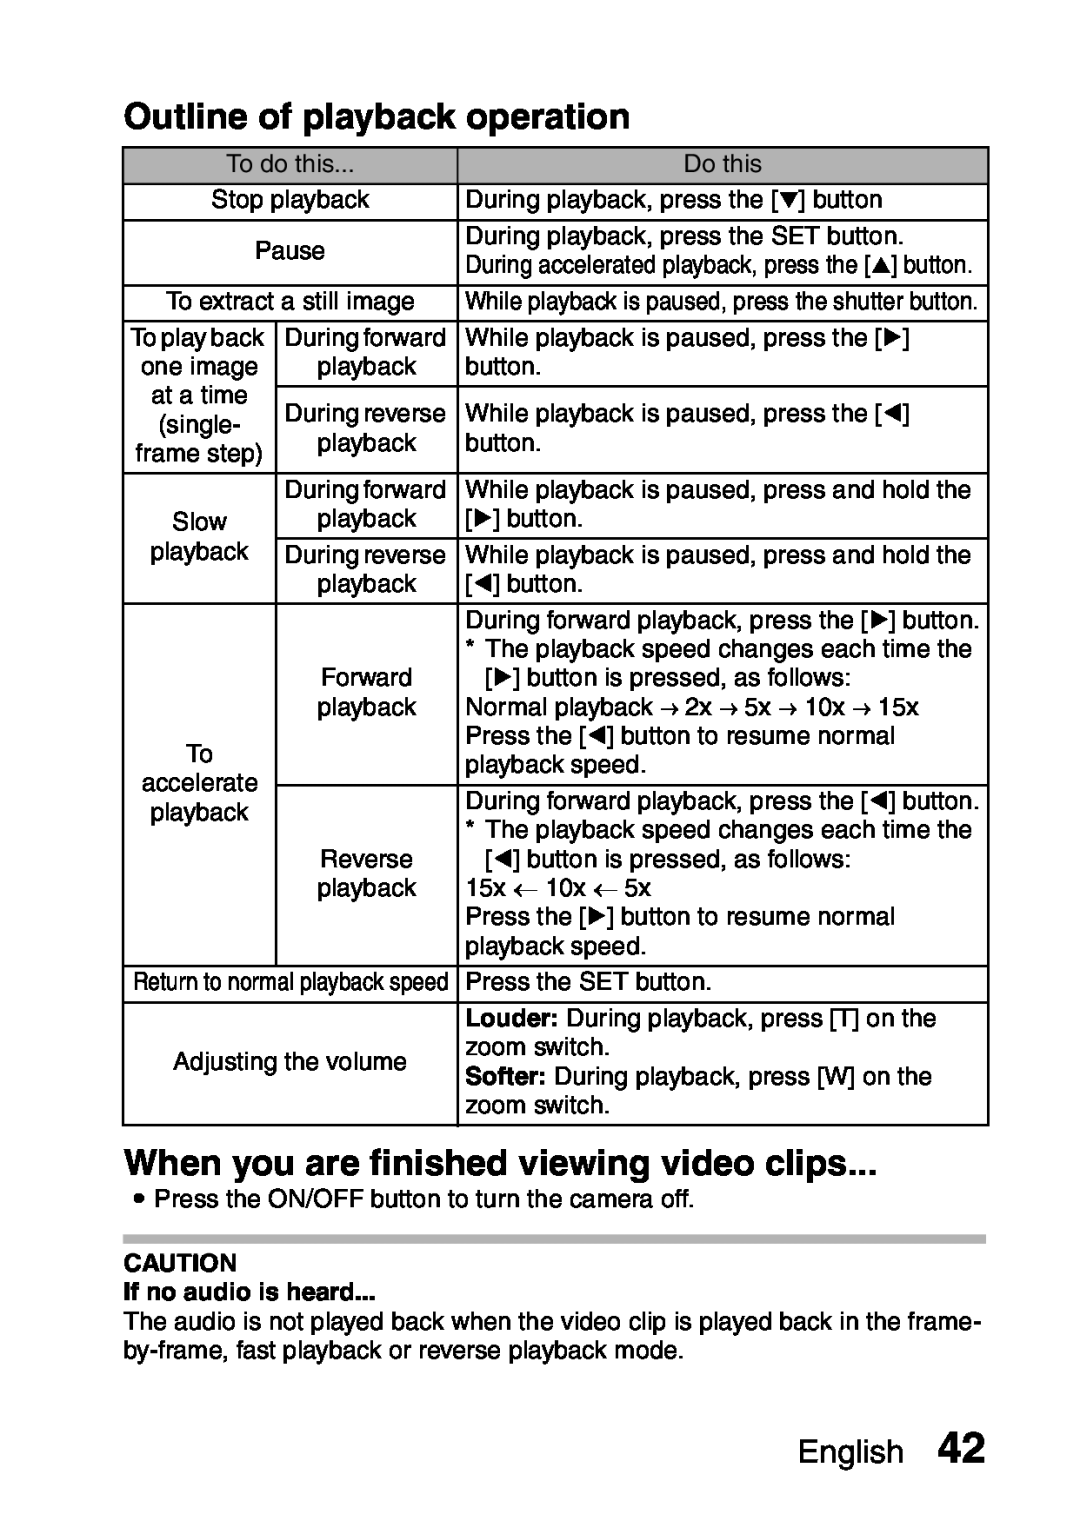 Sanyo VPC-S60 Outline of playback operation, When you are finished viewing video clips, If no audio is heard, English 